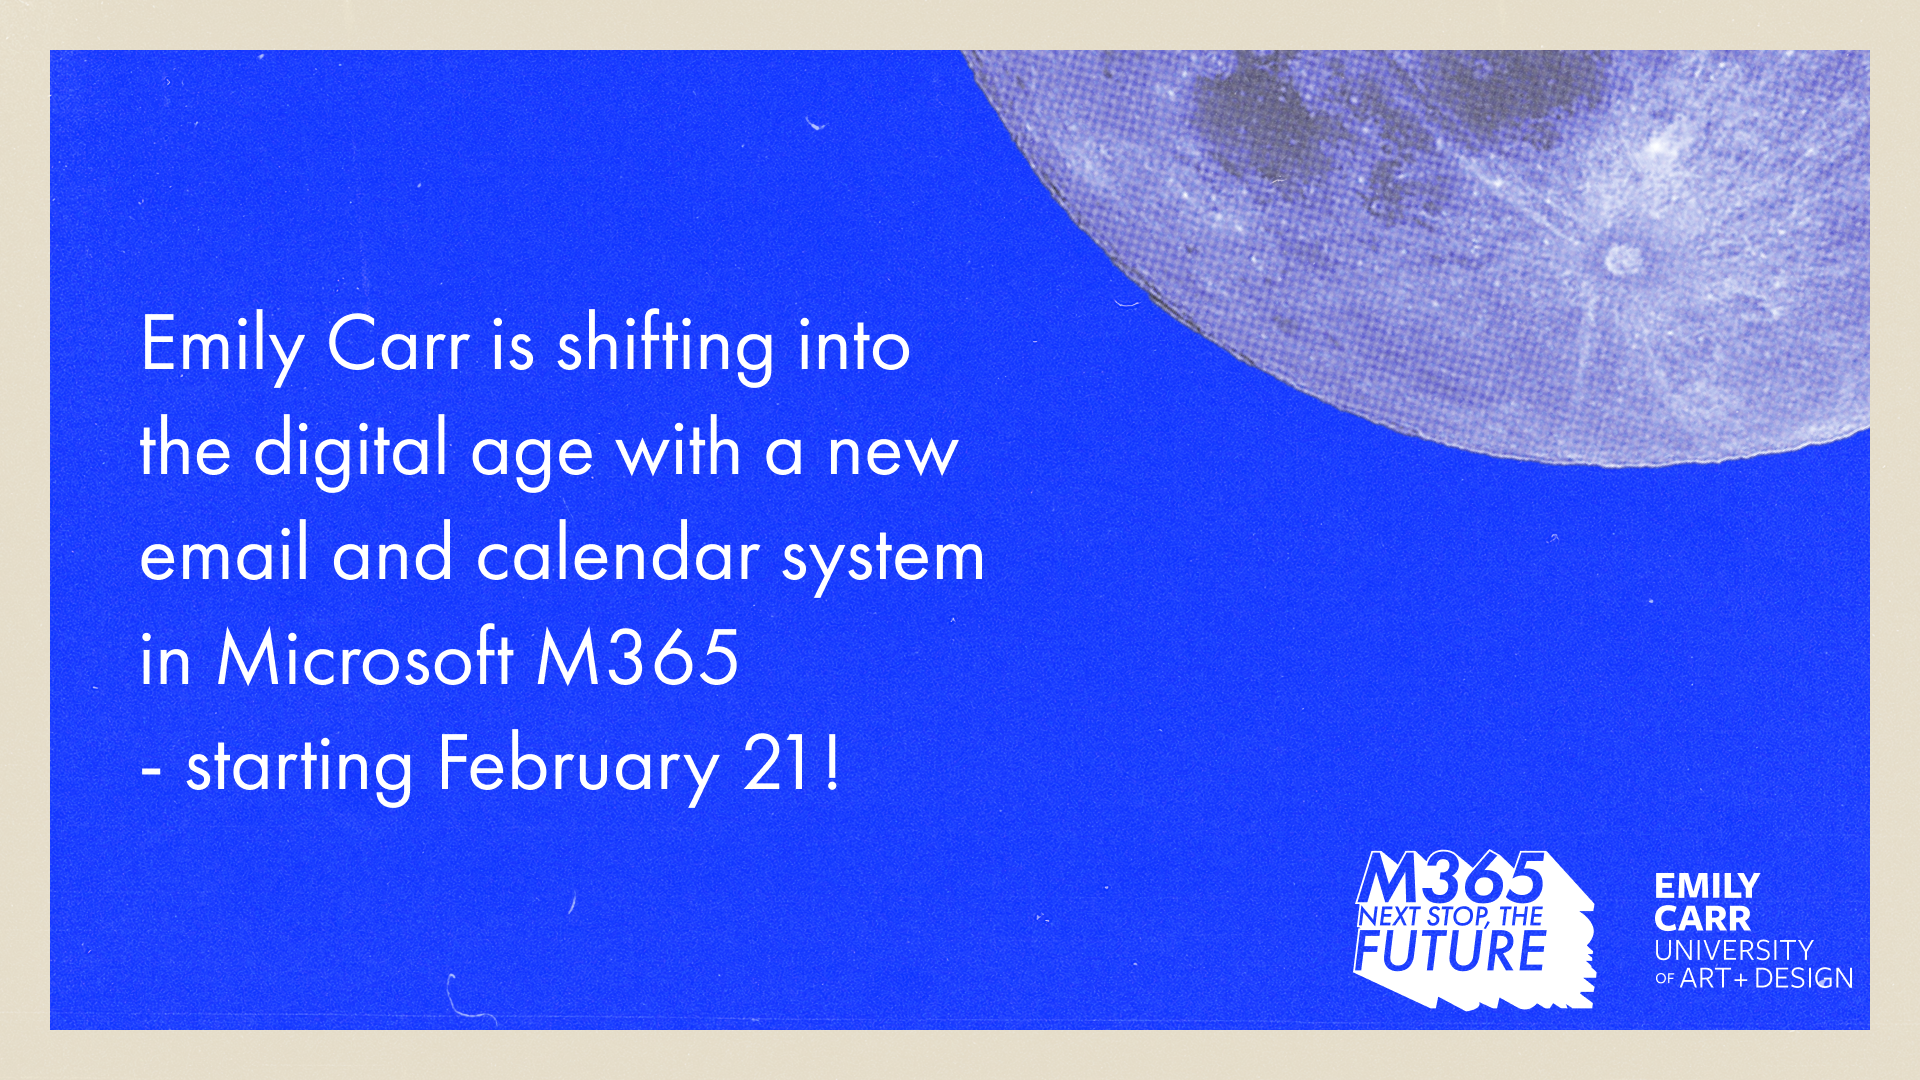 Text reads "Emily Carr is shifting into the digital age with a new email and calendar system in Microsoft M365 - starting Feb. 21! "